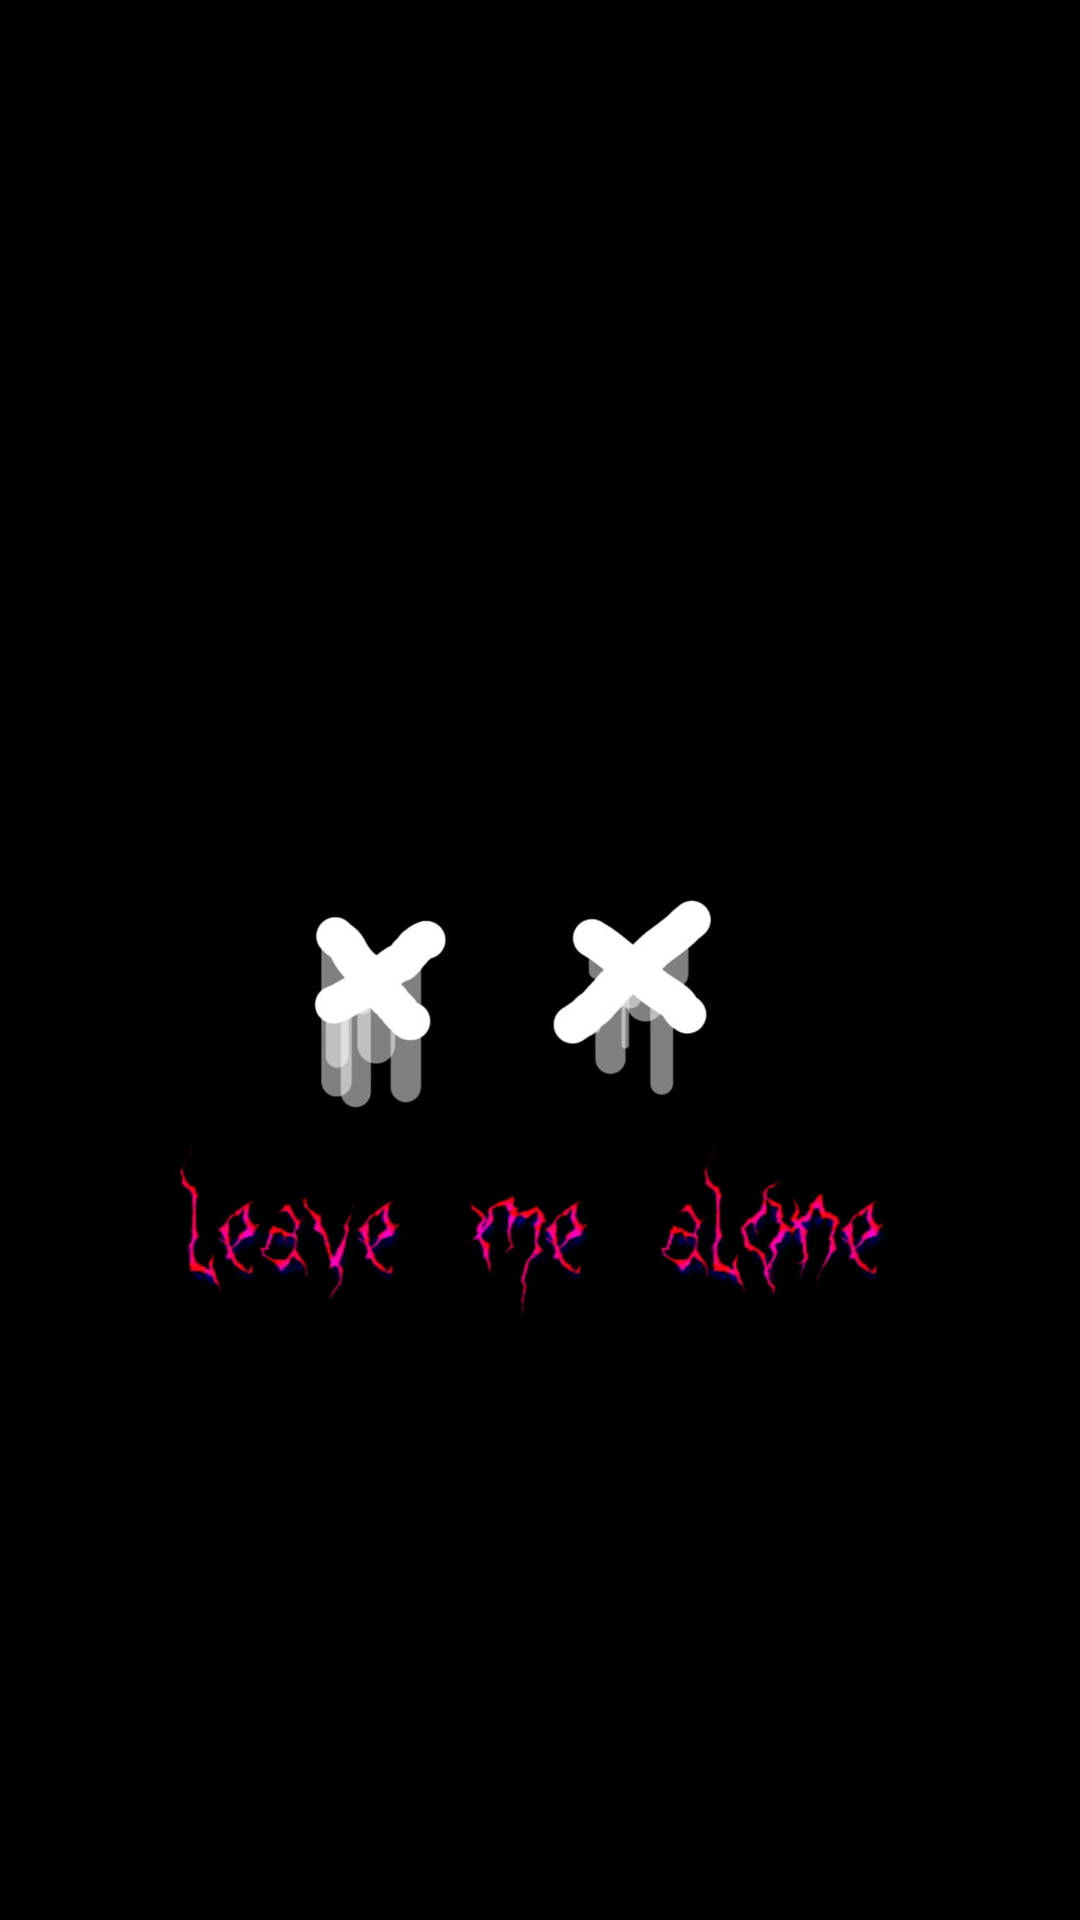 Expressive Illustration With 'x' Eyes Saying Leave Me Alone